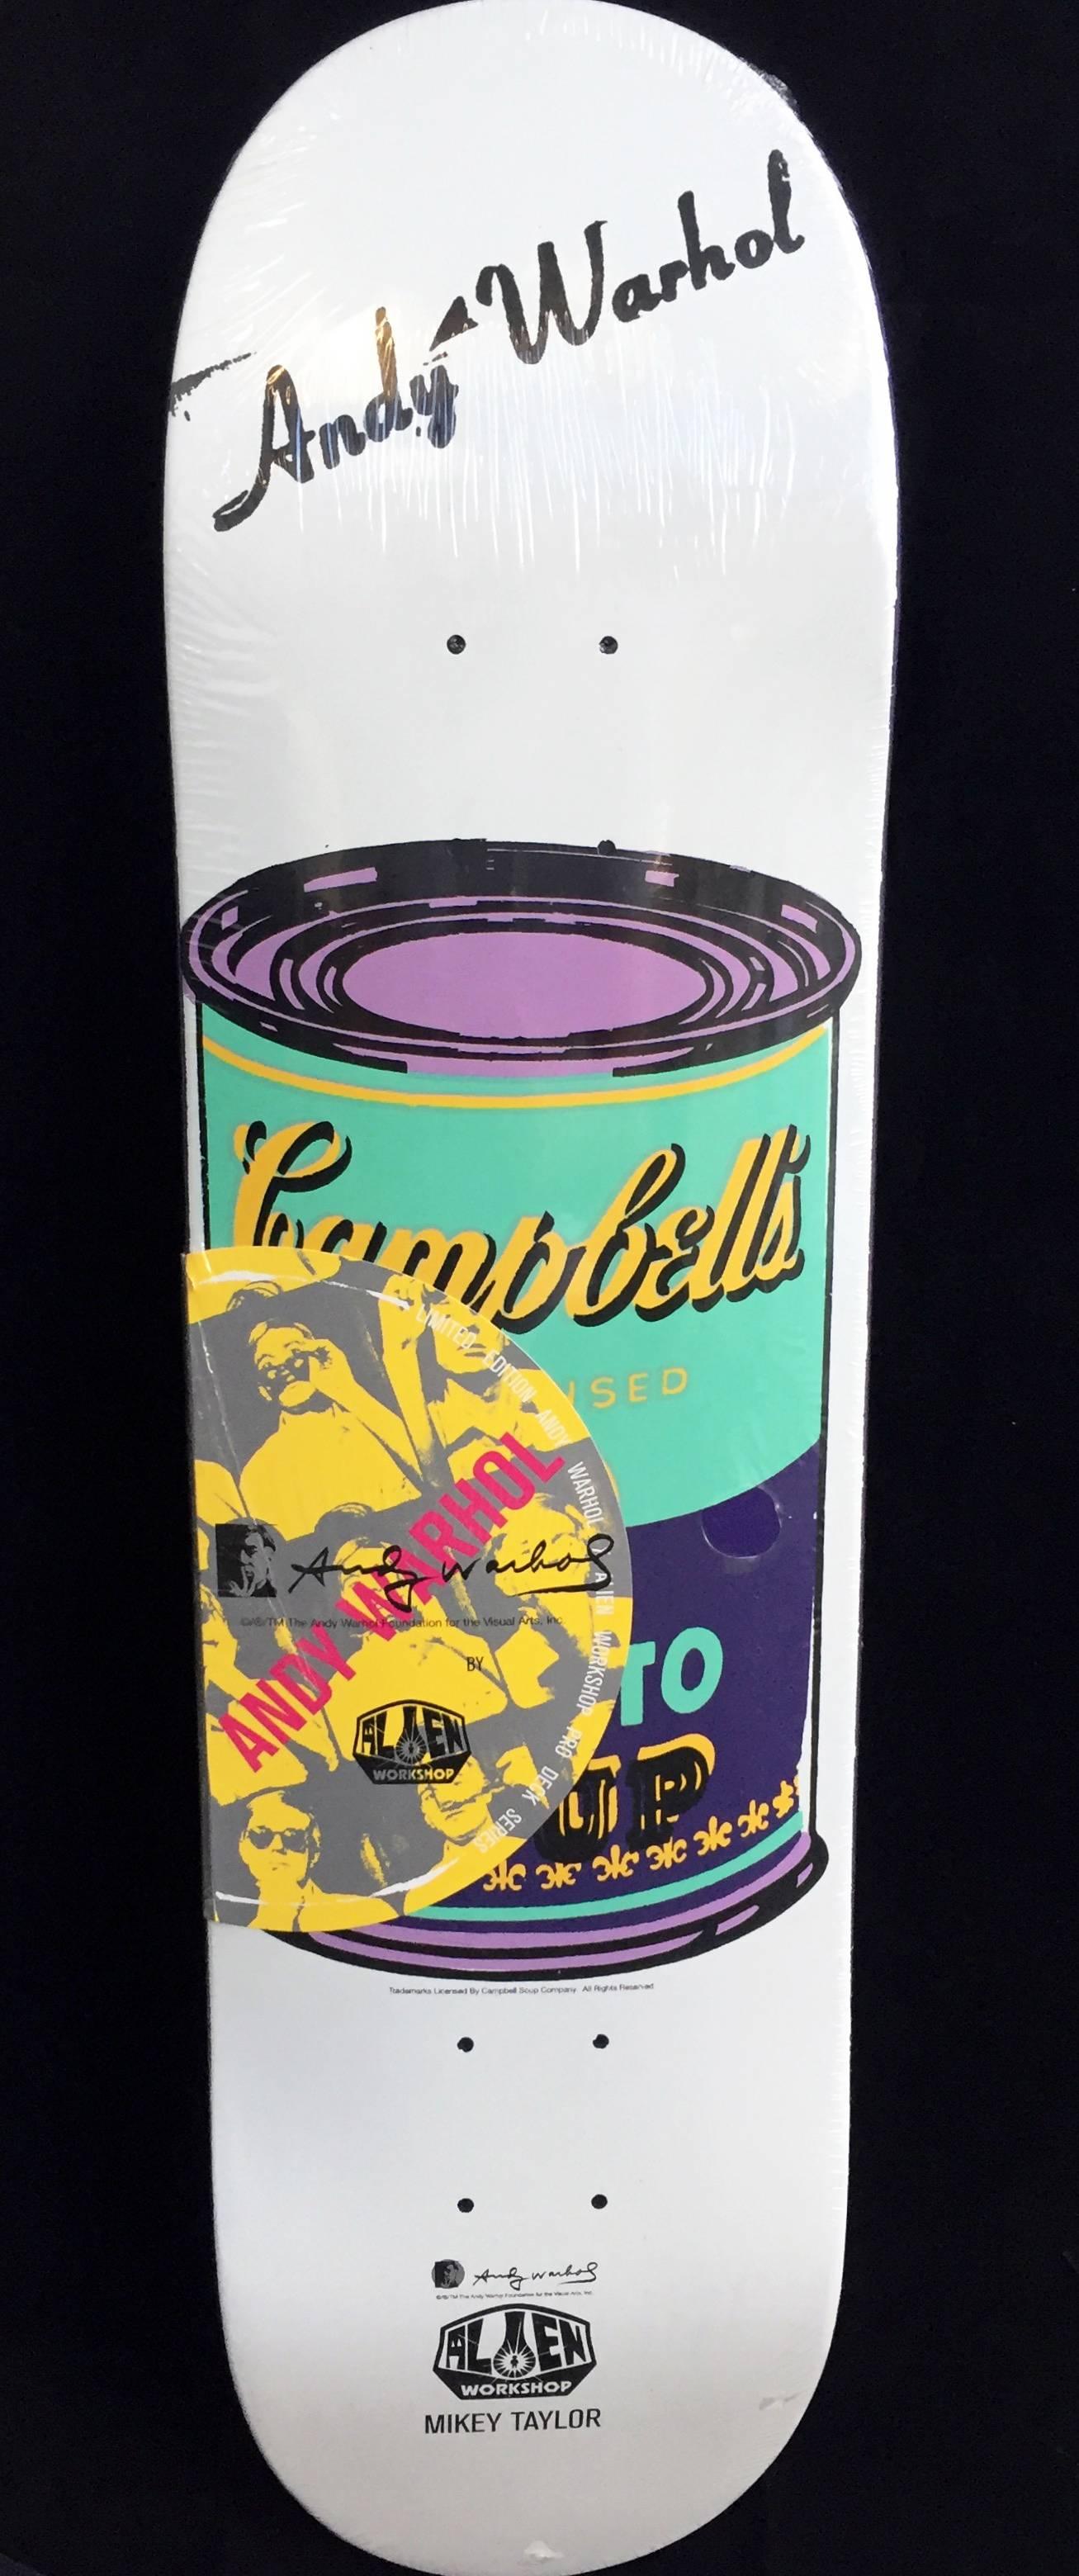 Andy Warhol Skateboard Deck (Warhol Campbell's Soup)  - Pop Art Print by (after) Andy Warhol